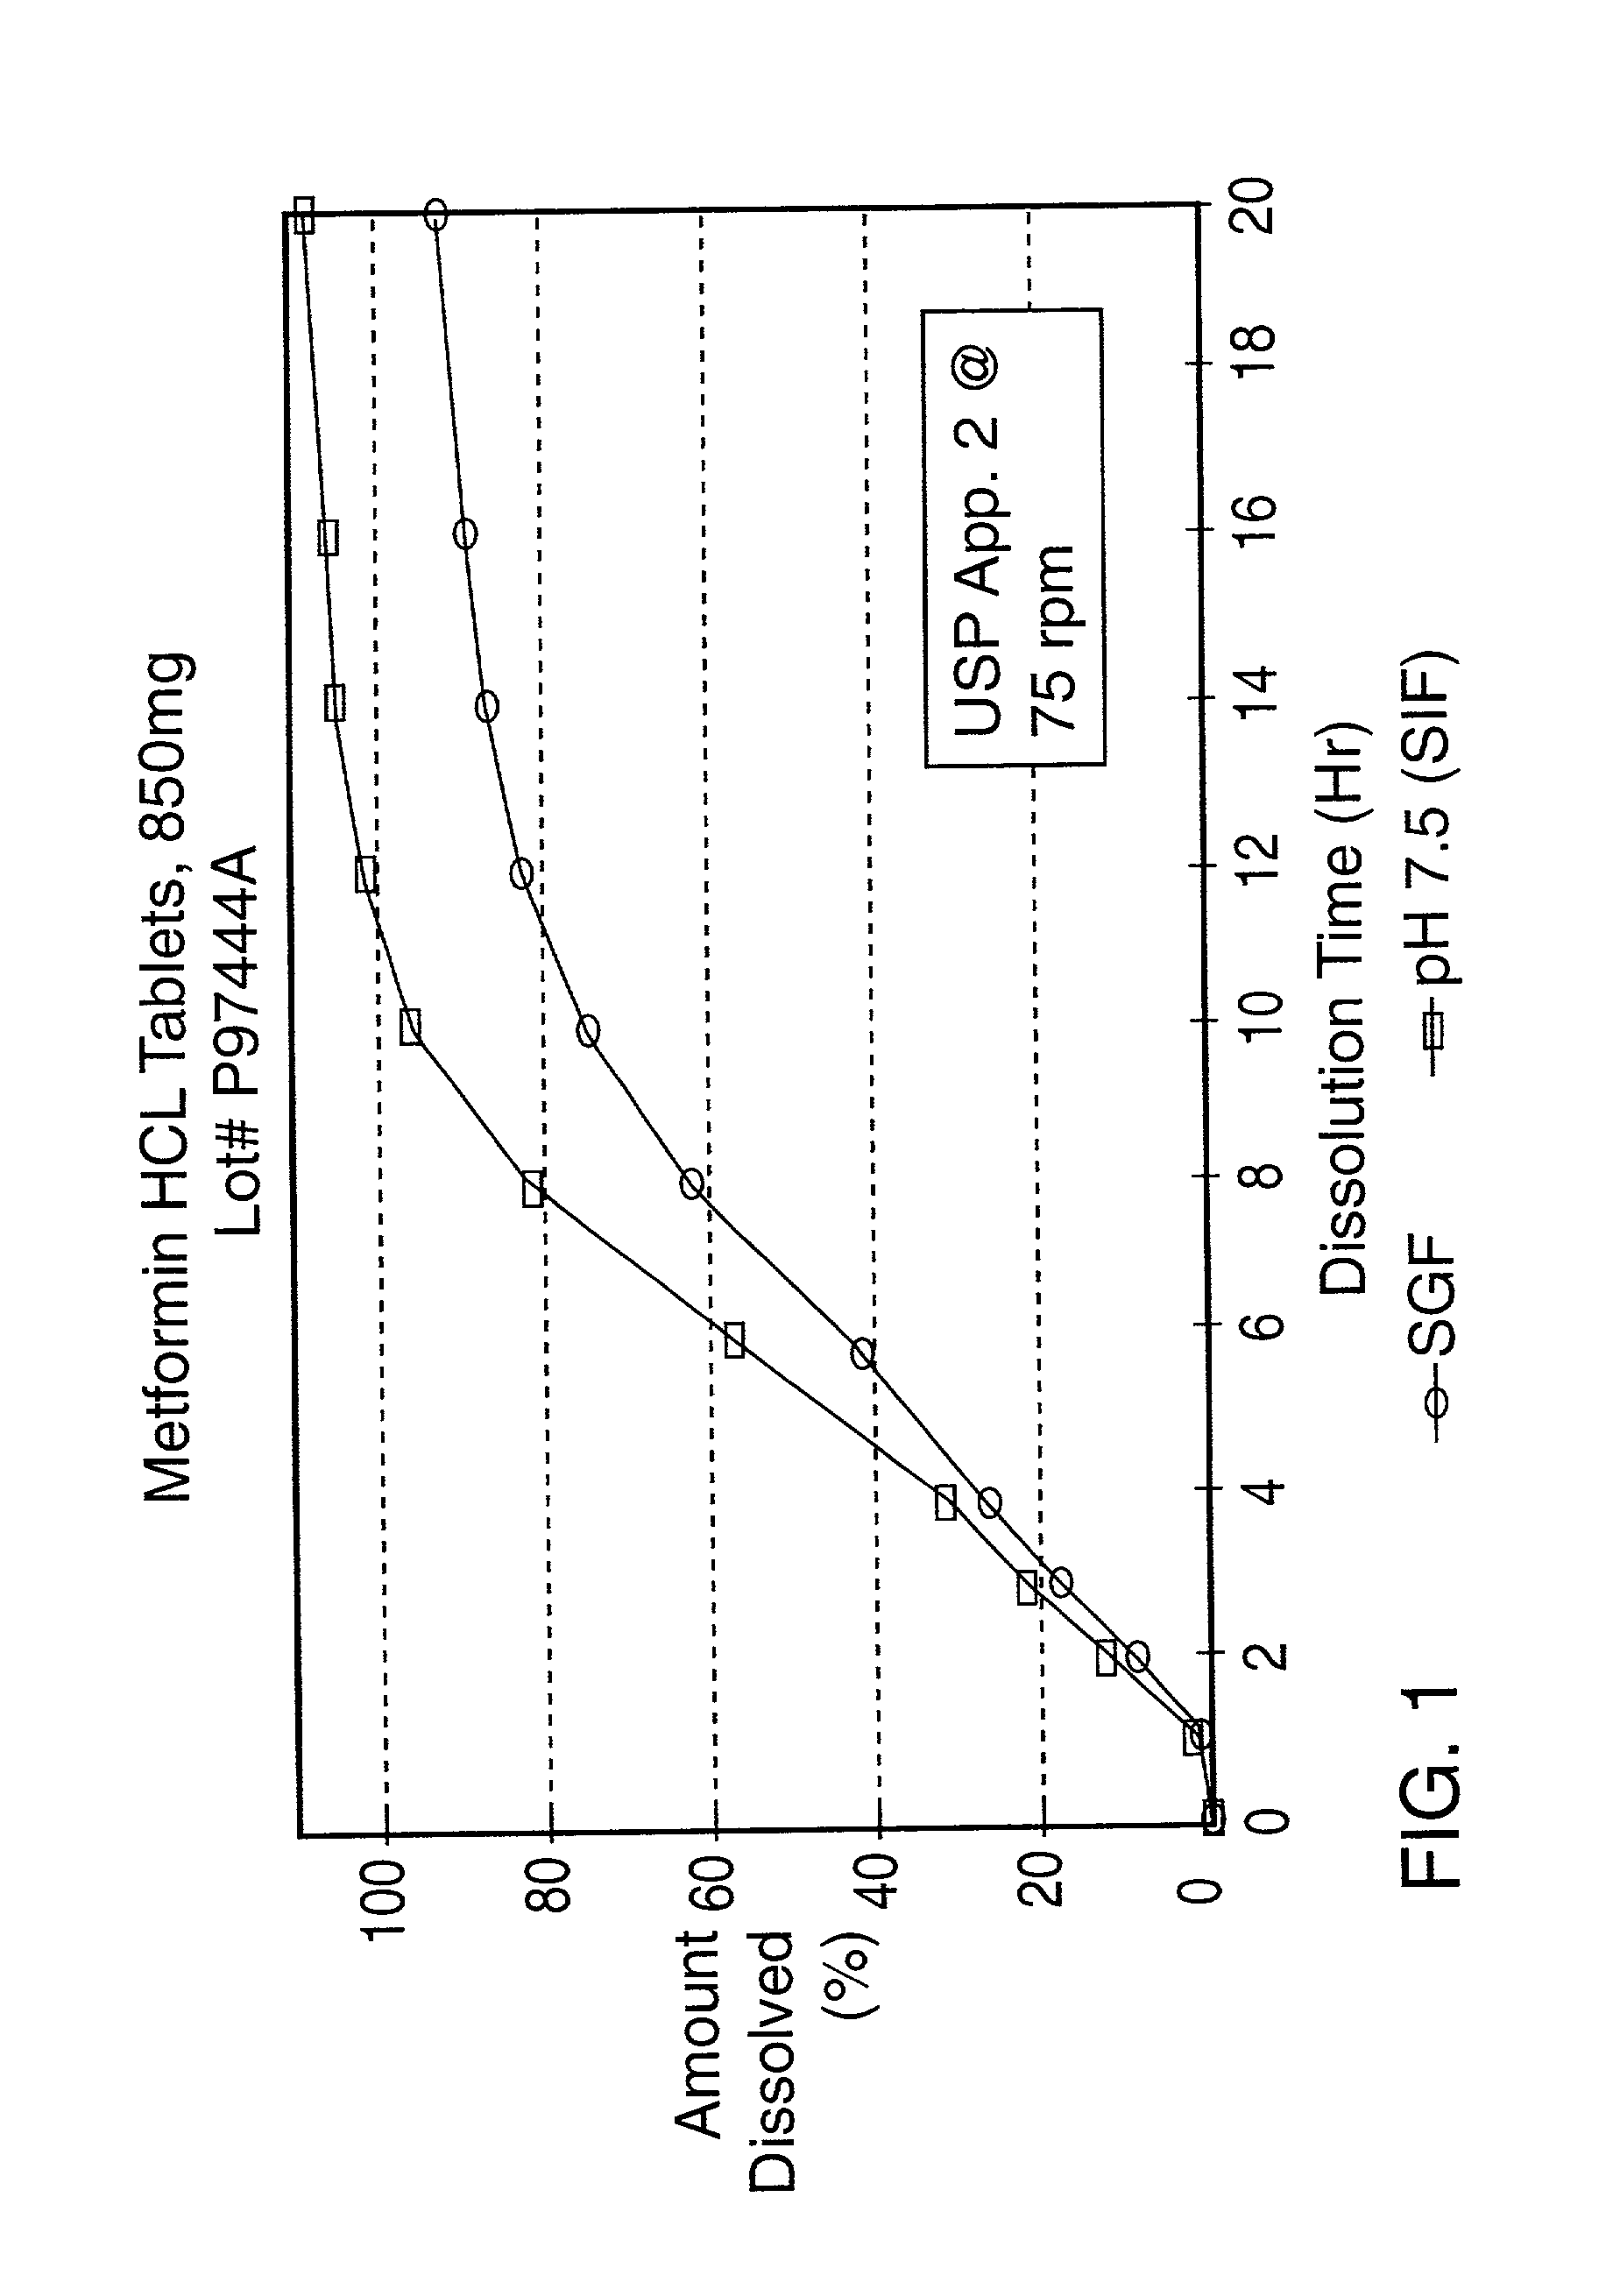 Controlled release oral tablet having a unitary core